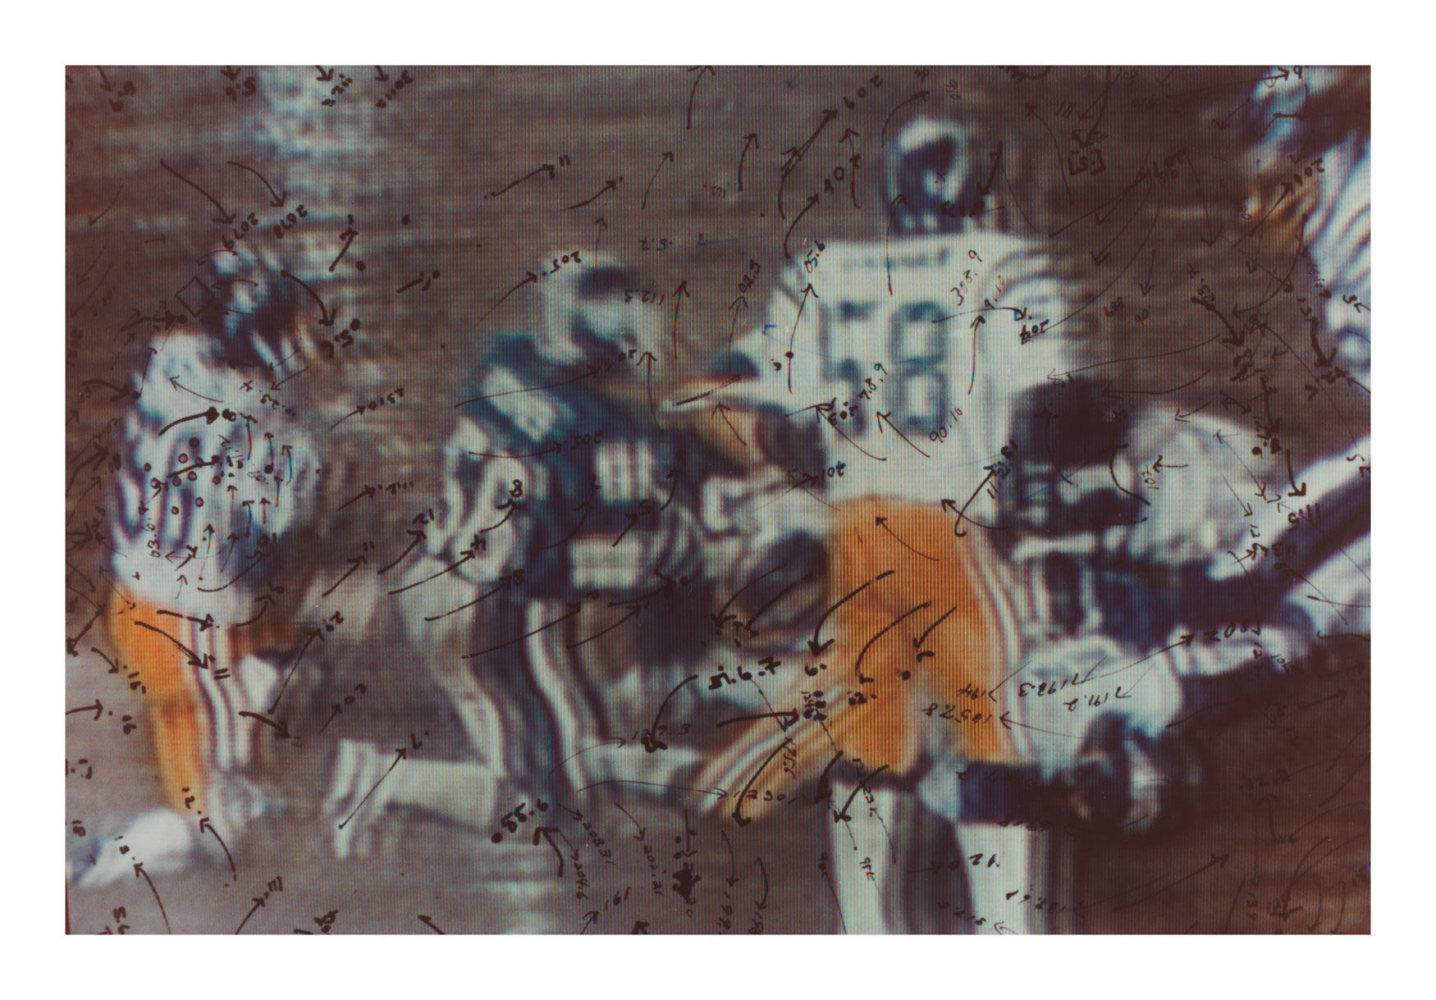 Howardena Pindell
Video Drawings: Football, 1976
C-Print
8 x 10 inches
Signed and dated
Courtesy of the Artist and Garth Greenan Gallery